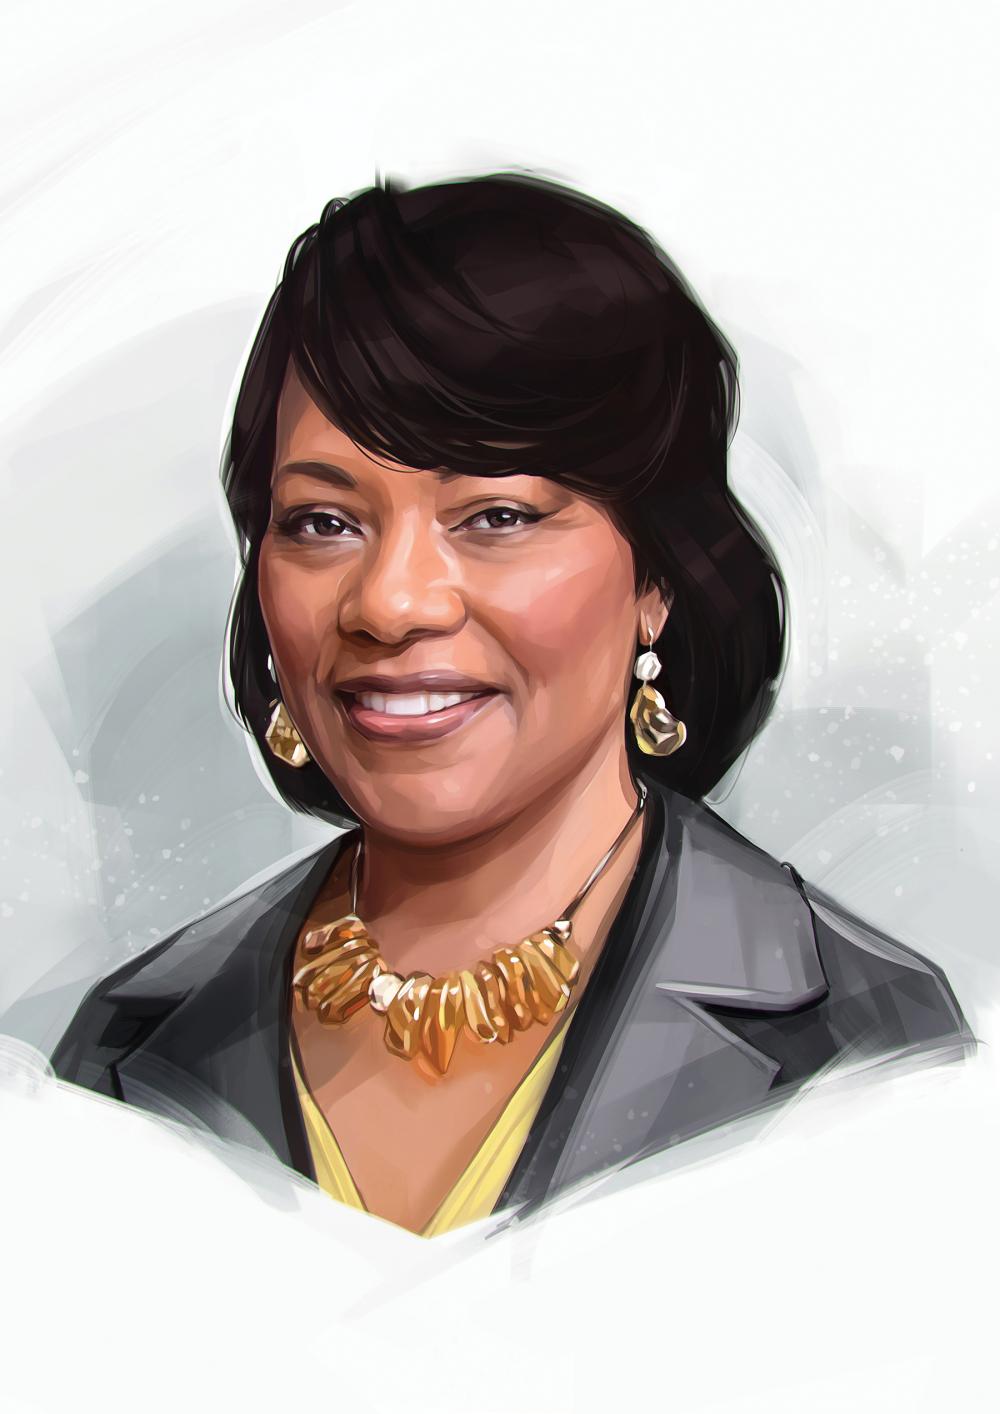 Bernice King has a passion for justice Rotary International